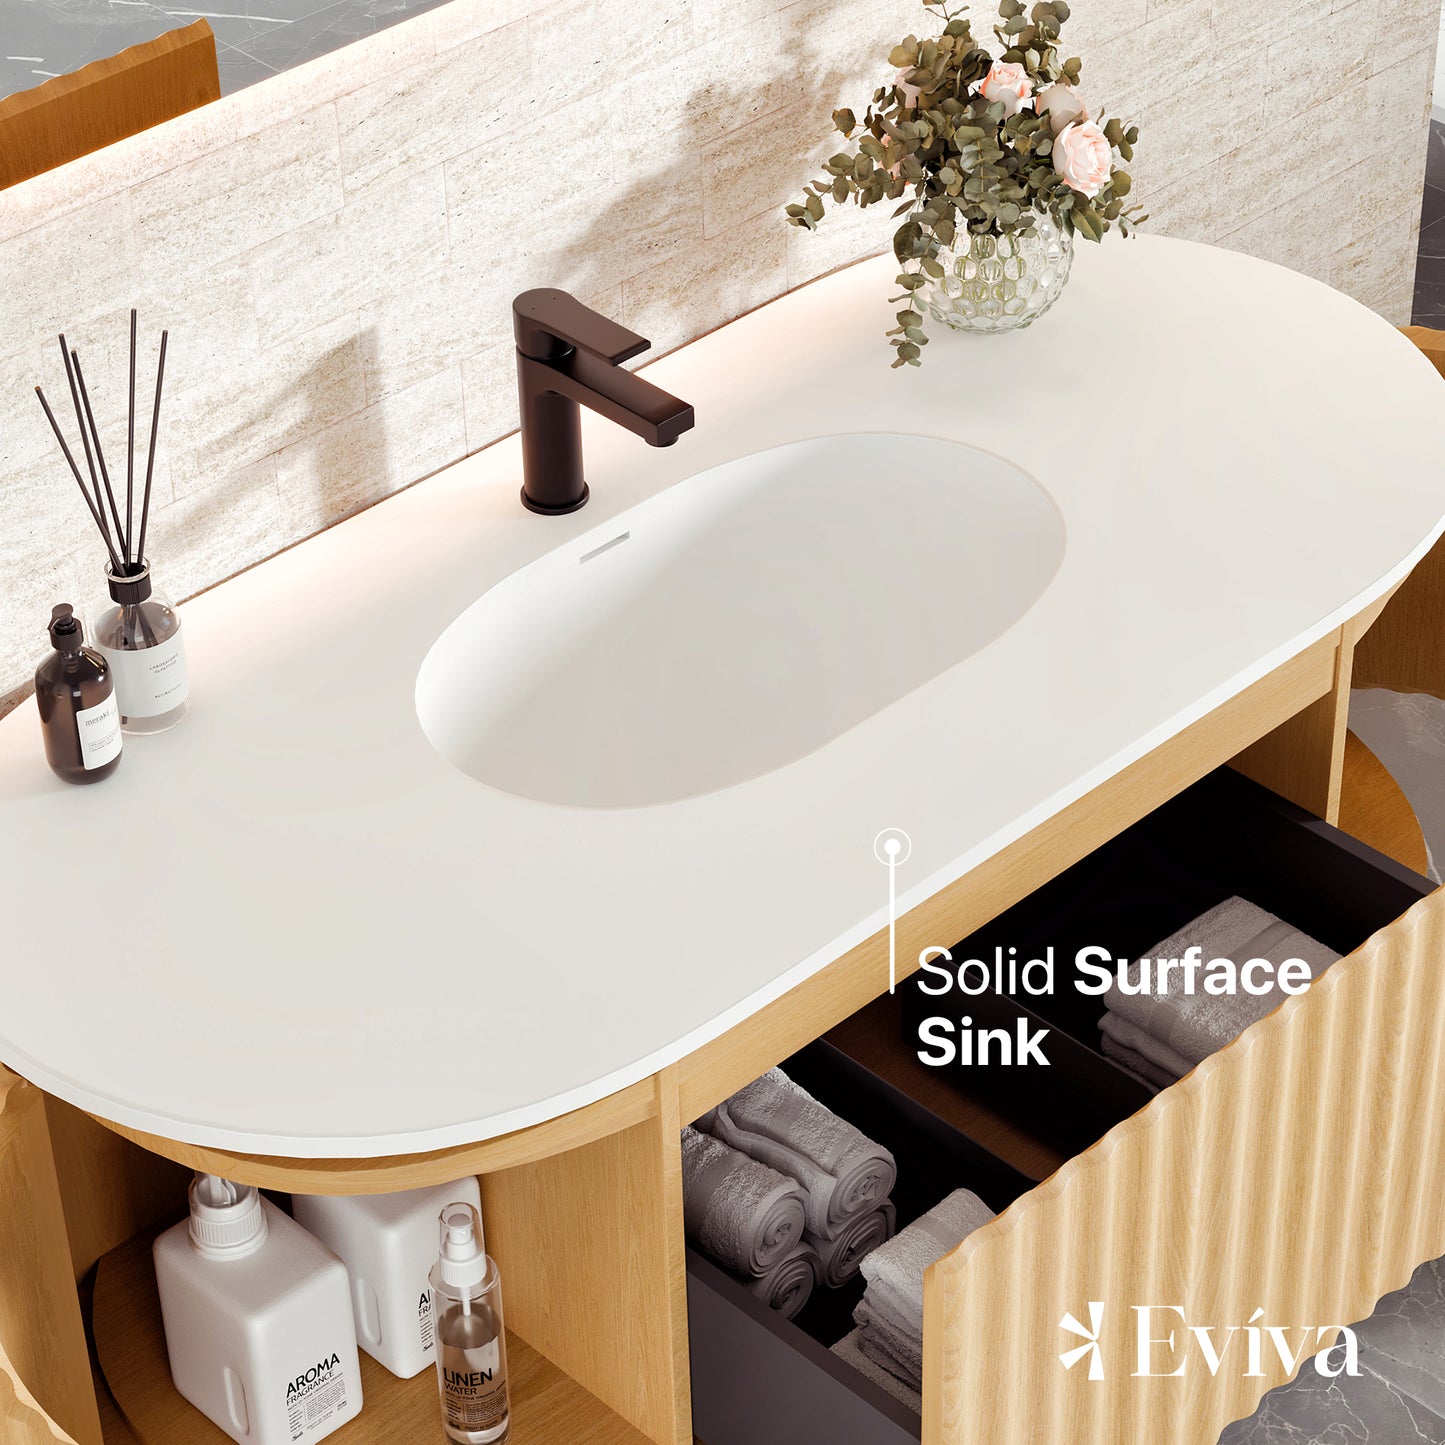 Haven 48"W x 22"D Natural Oak Bathroom Vanity with Solid Surface Countertop and Integrated Sink